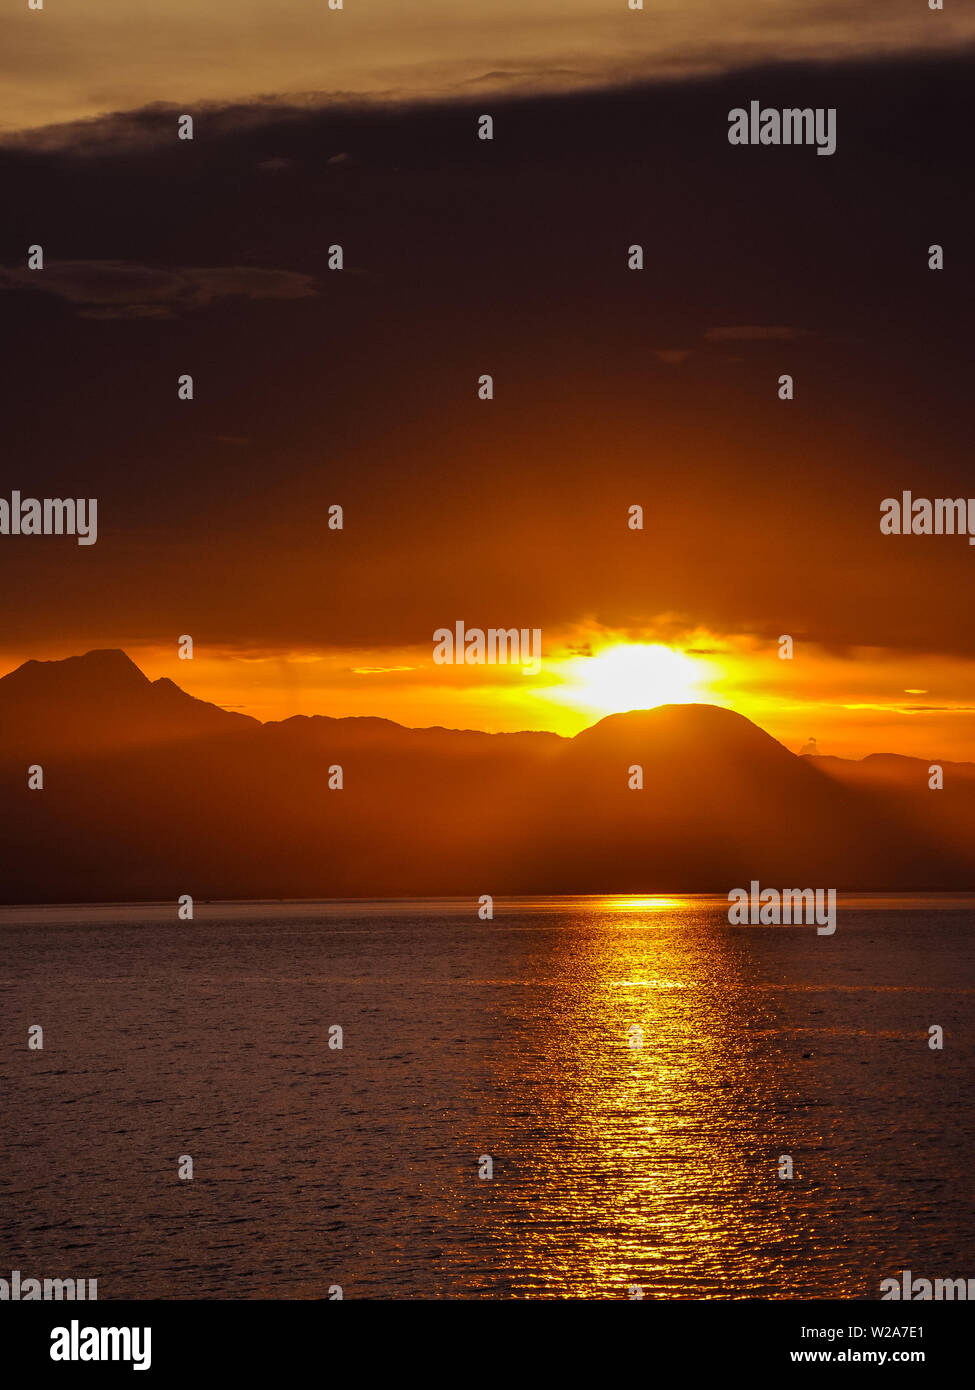 Sunset over Siquijor Island, the Philippines. Stock Photo